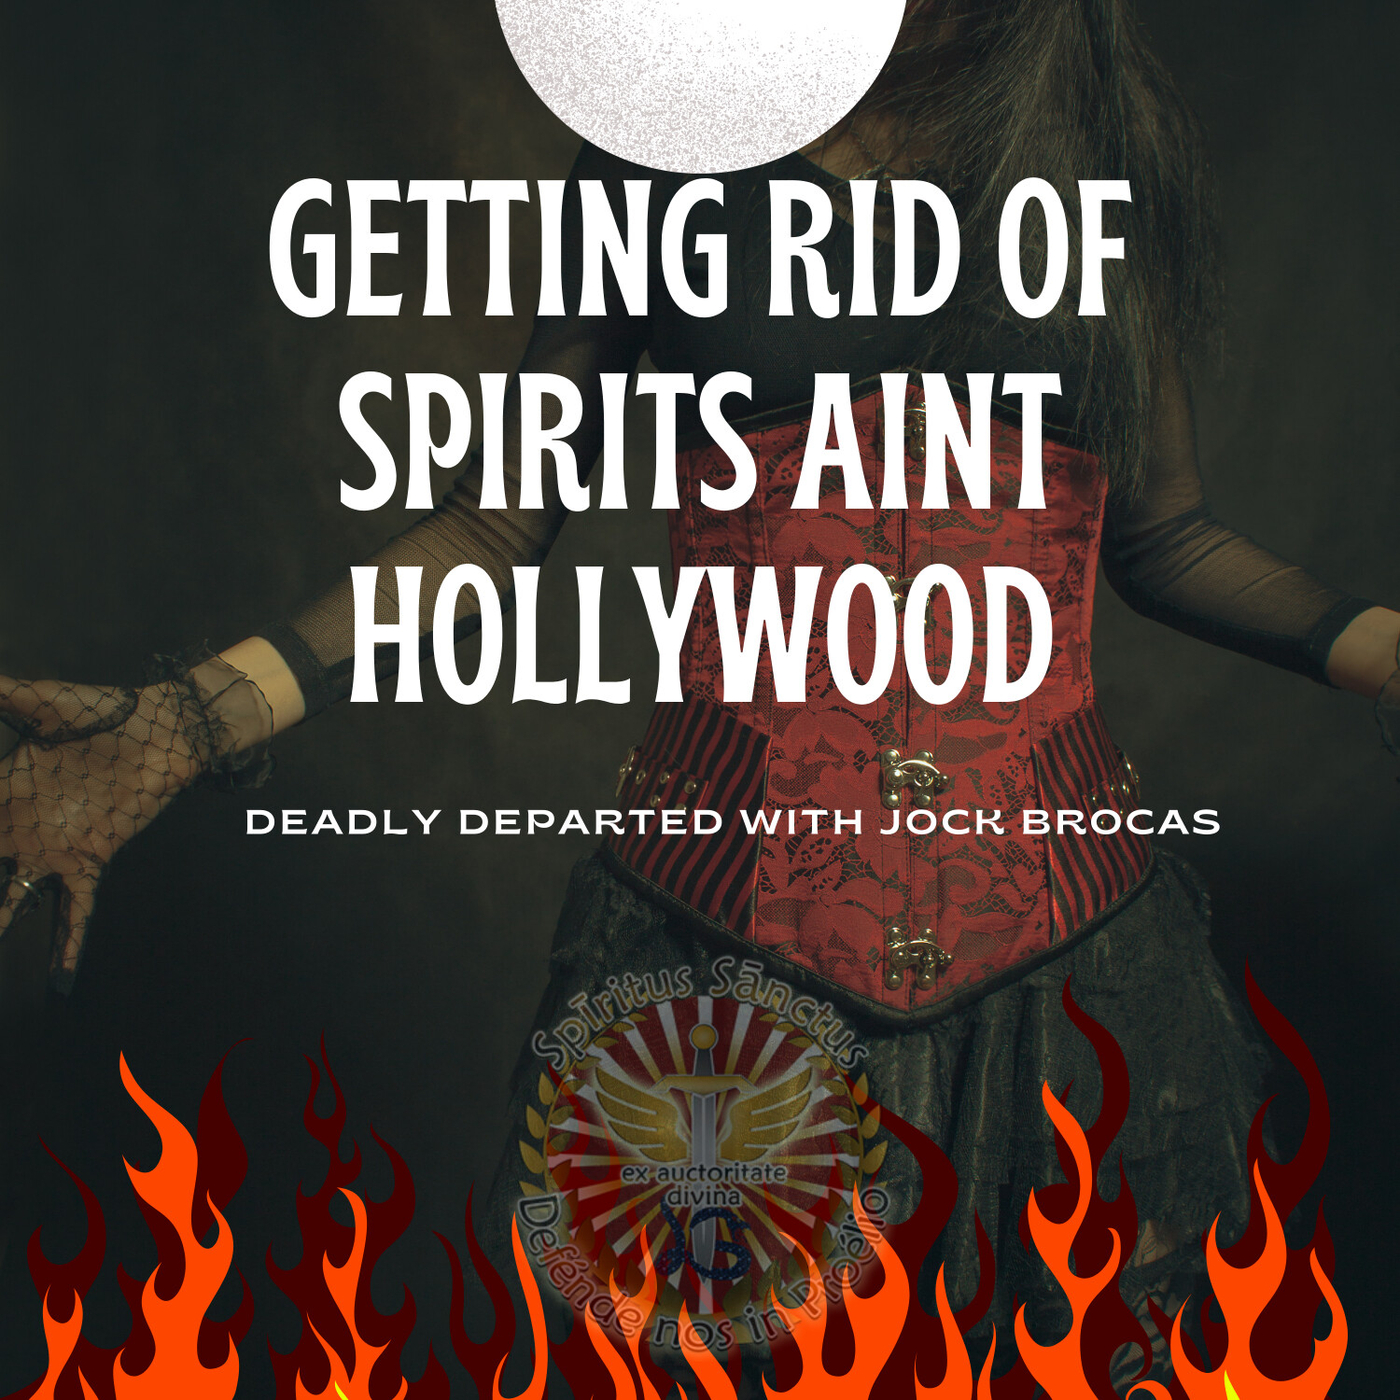 Getting Rid Of Spirits Is Not Hollywood